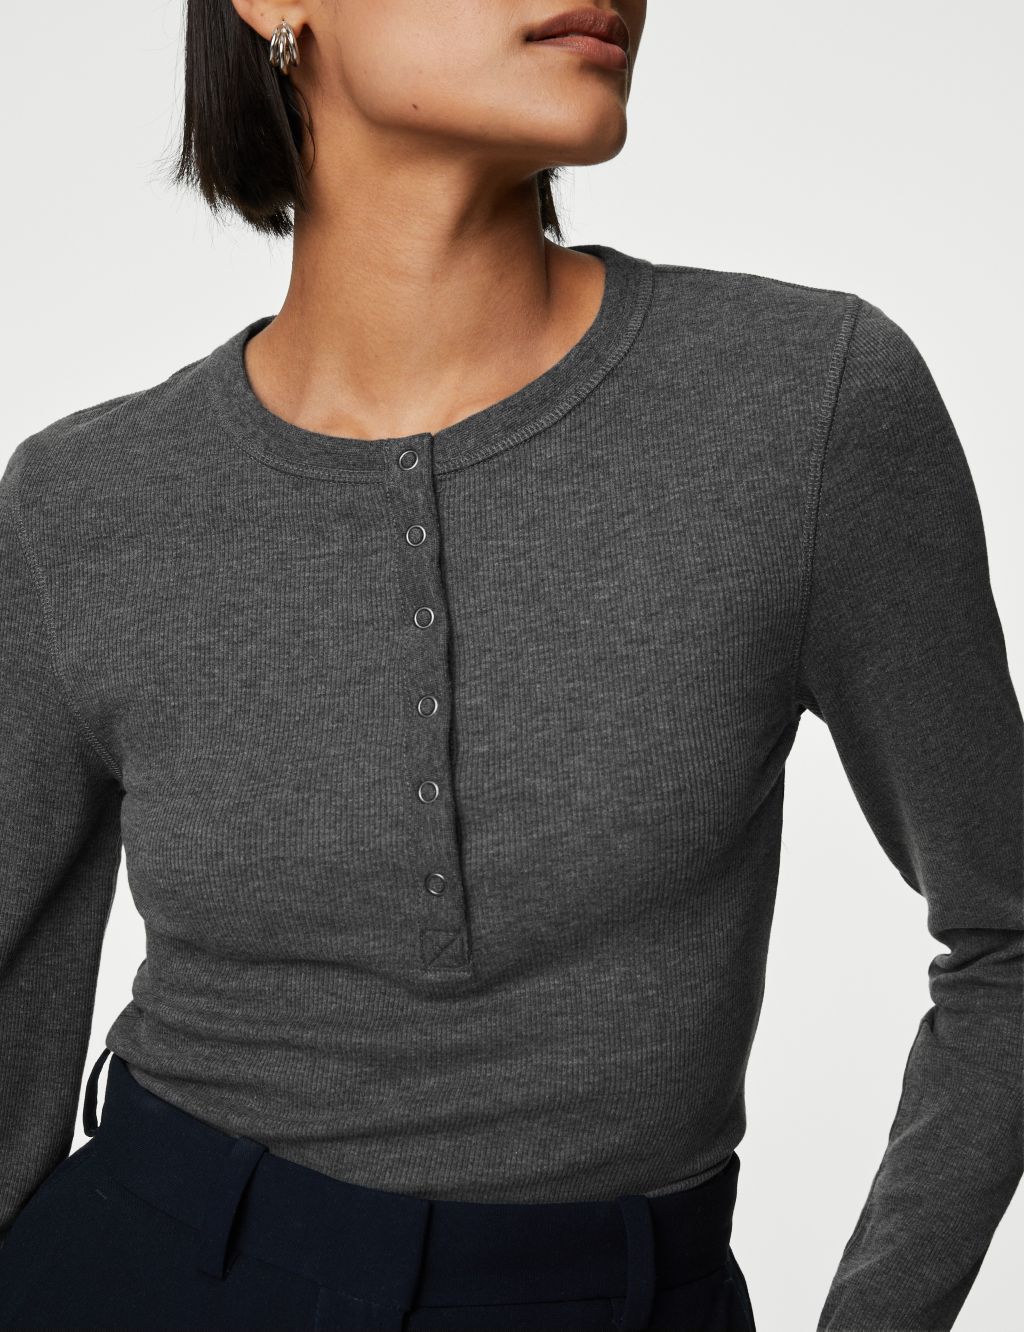 Cotton Rich Ribbed Henley Top image 1